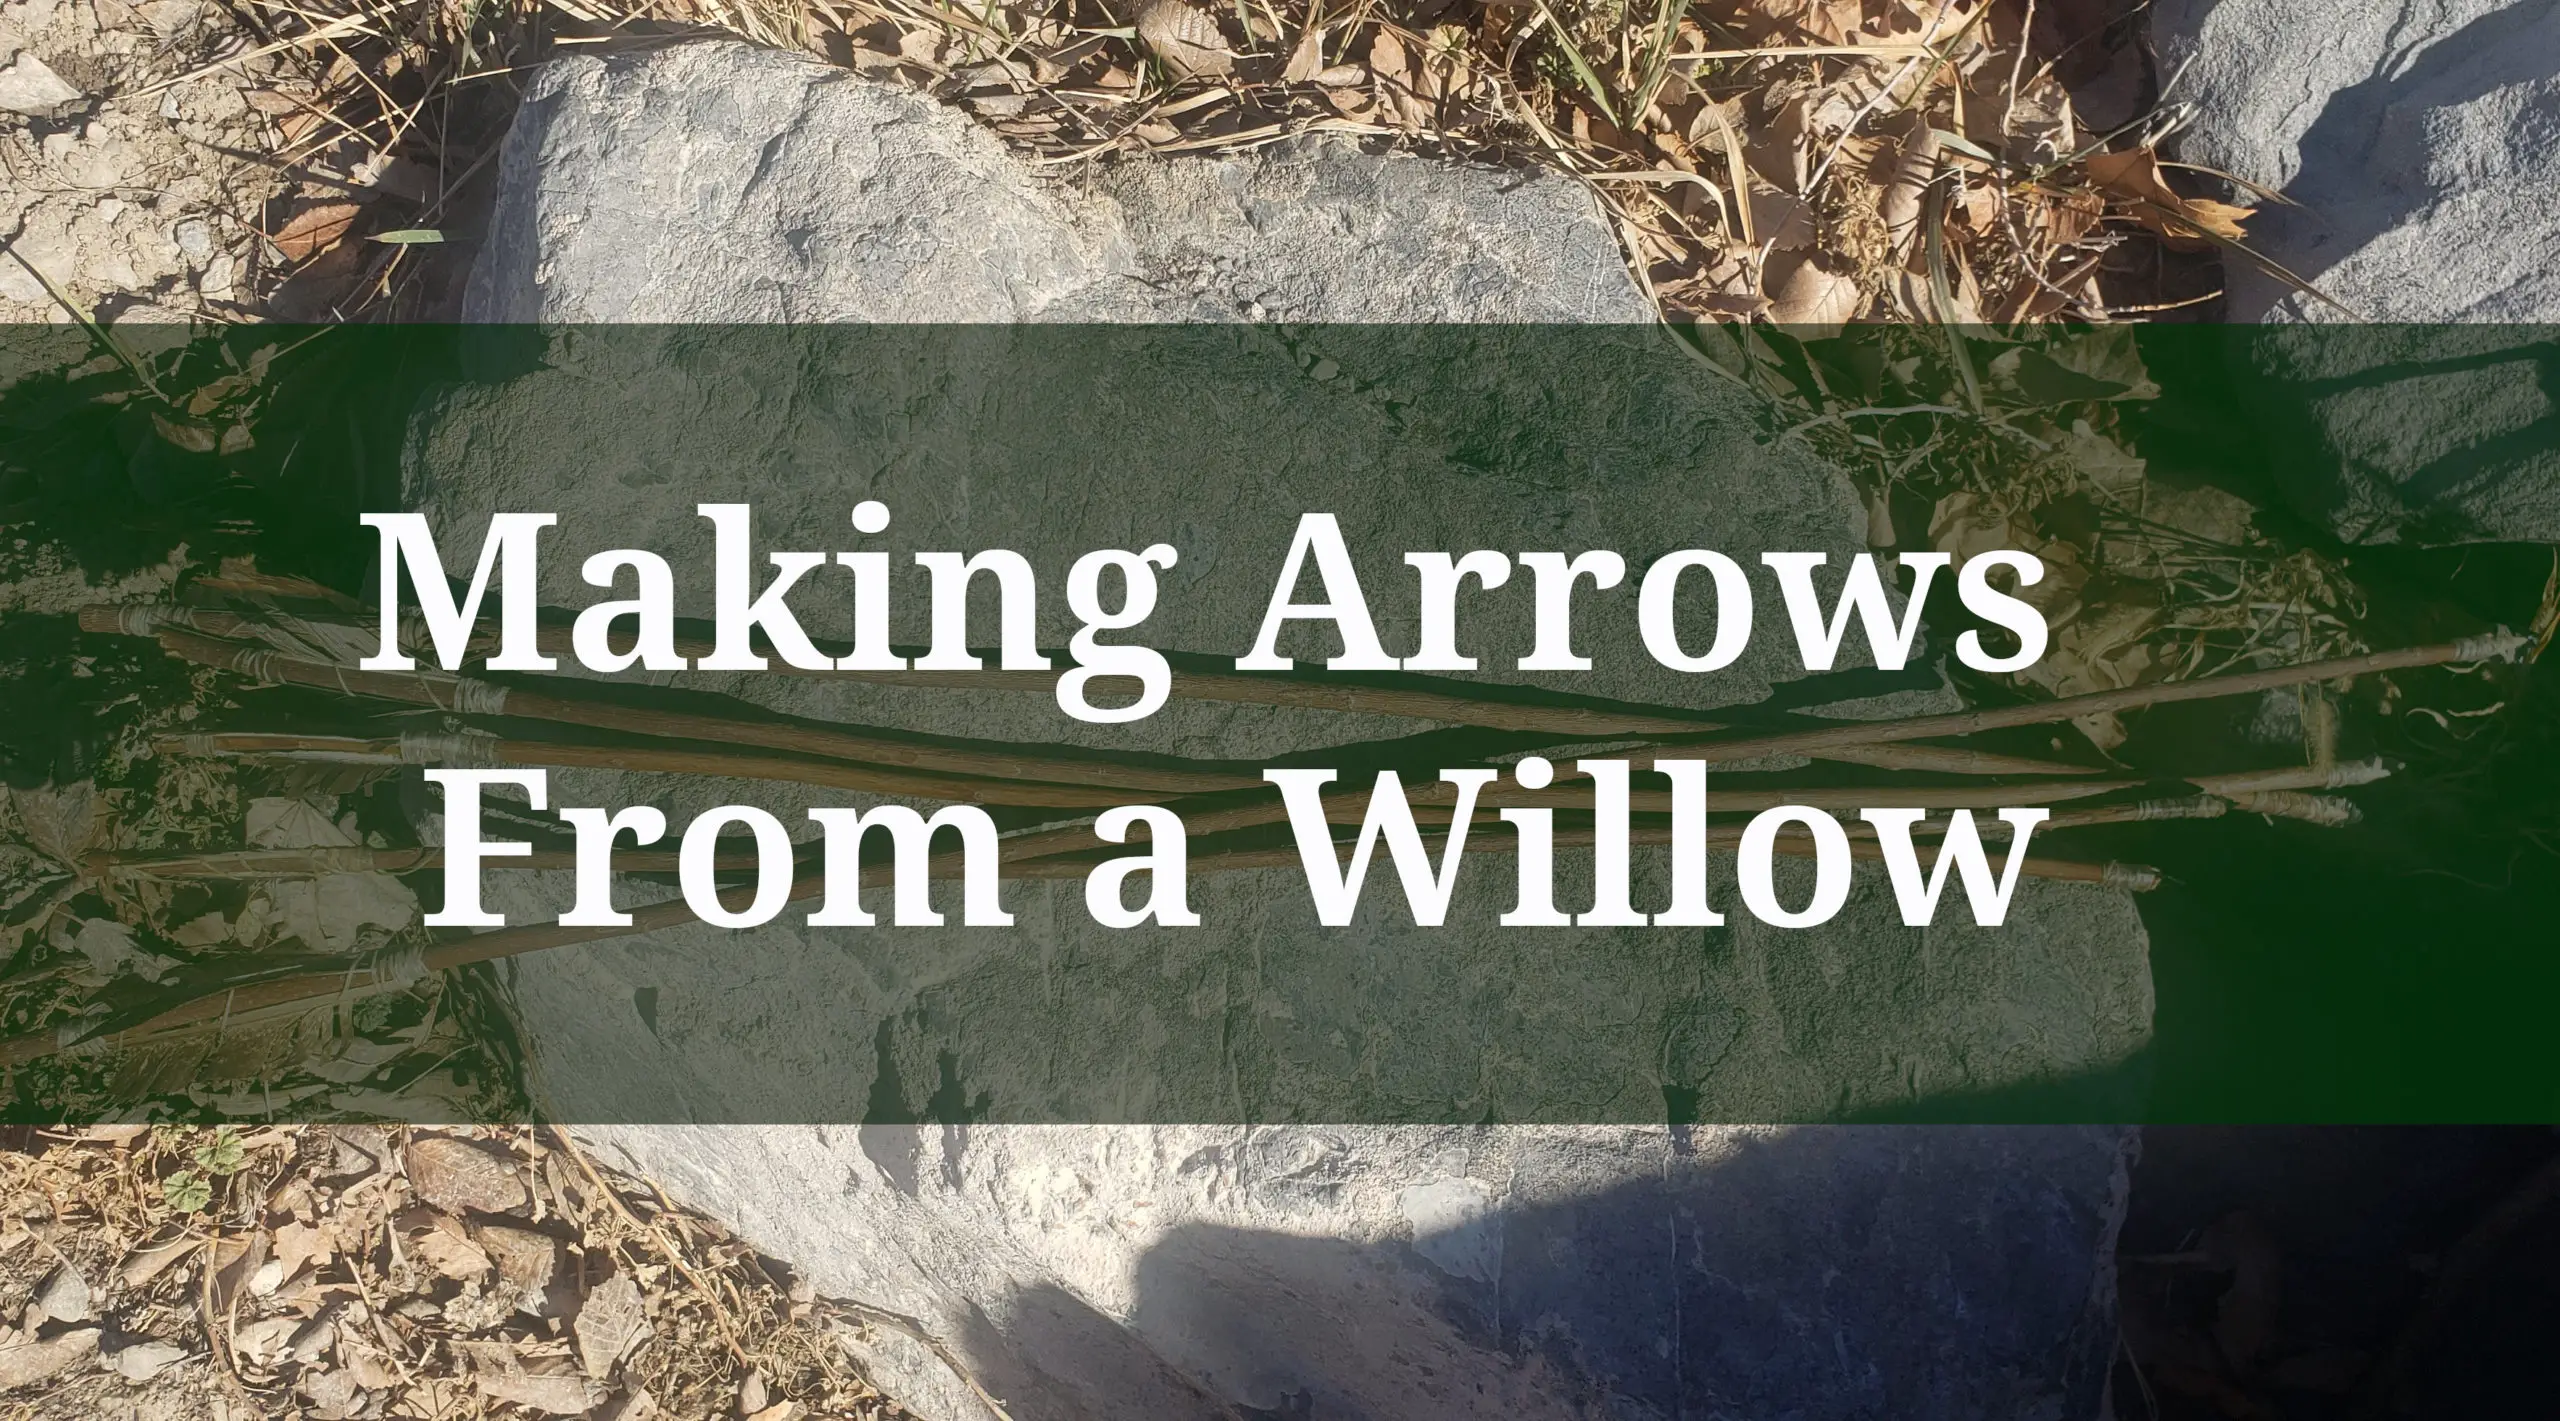 Making Arrows from Willows